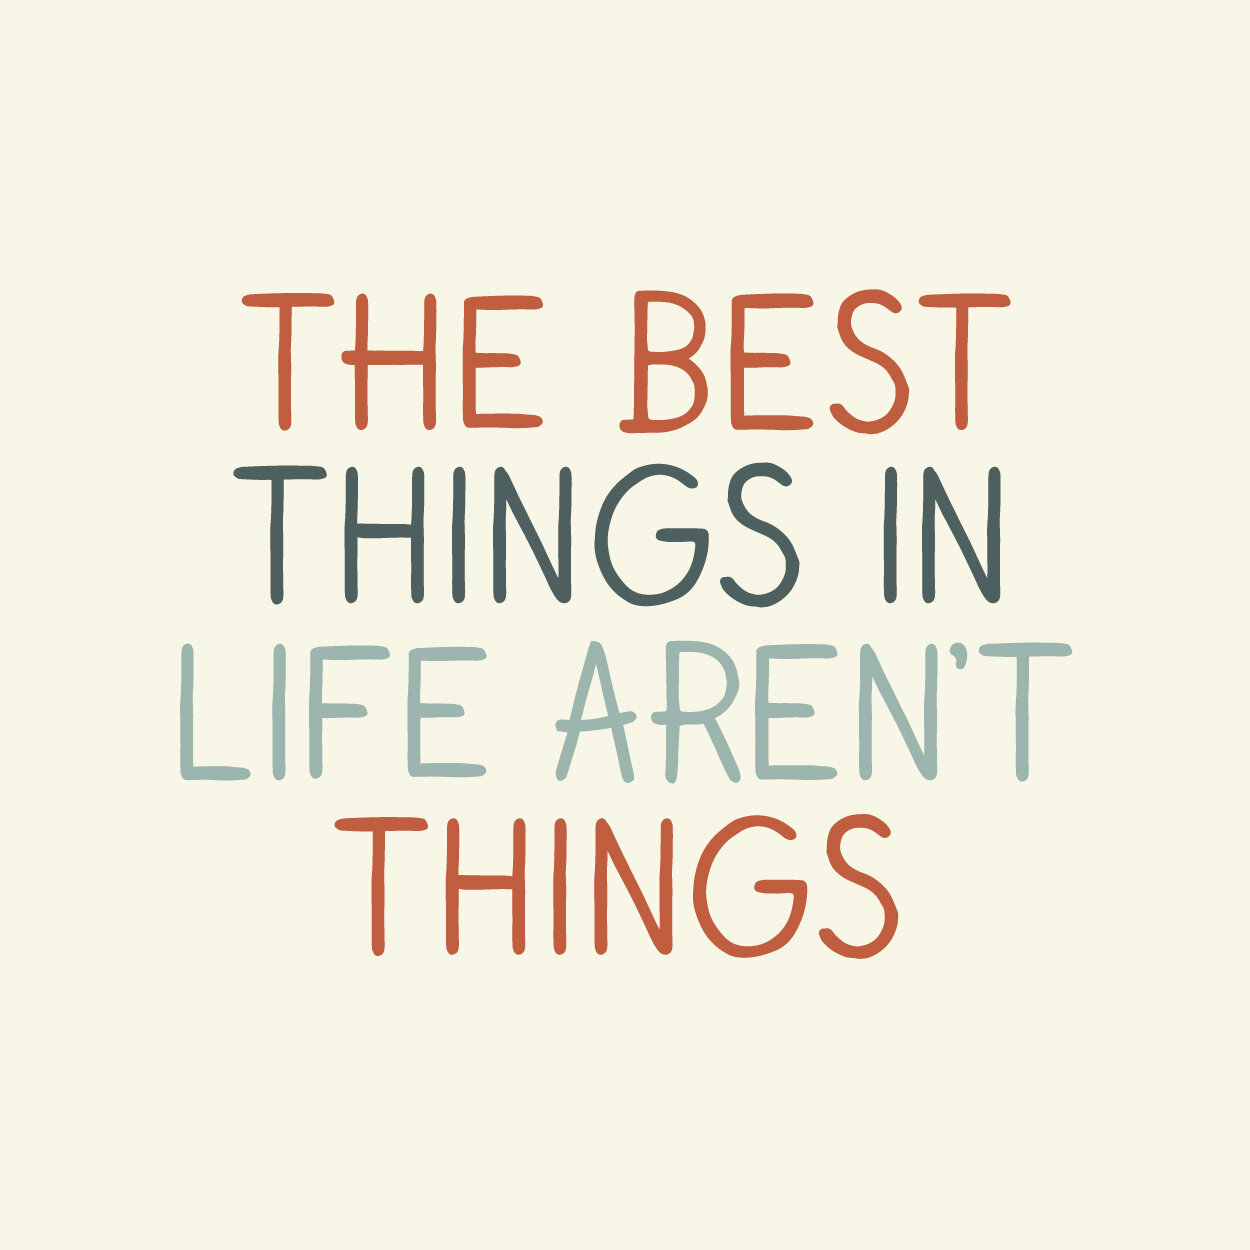 Good things перевод на русский. The best things in Life. Good thing обои.